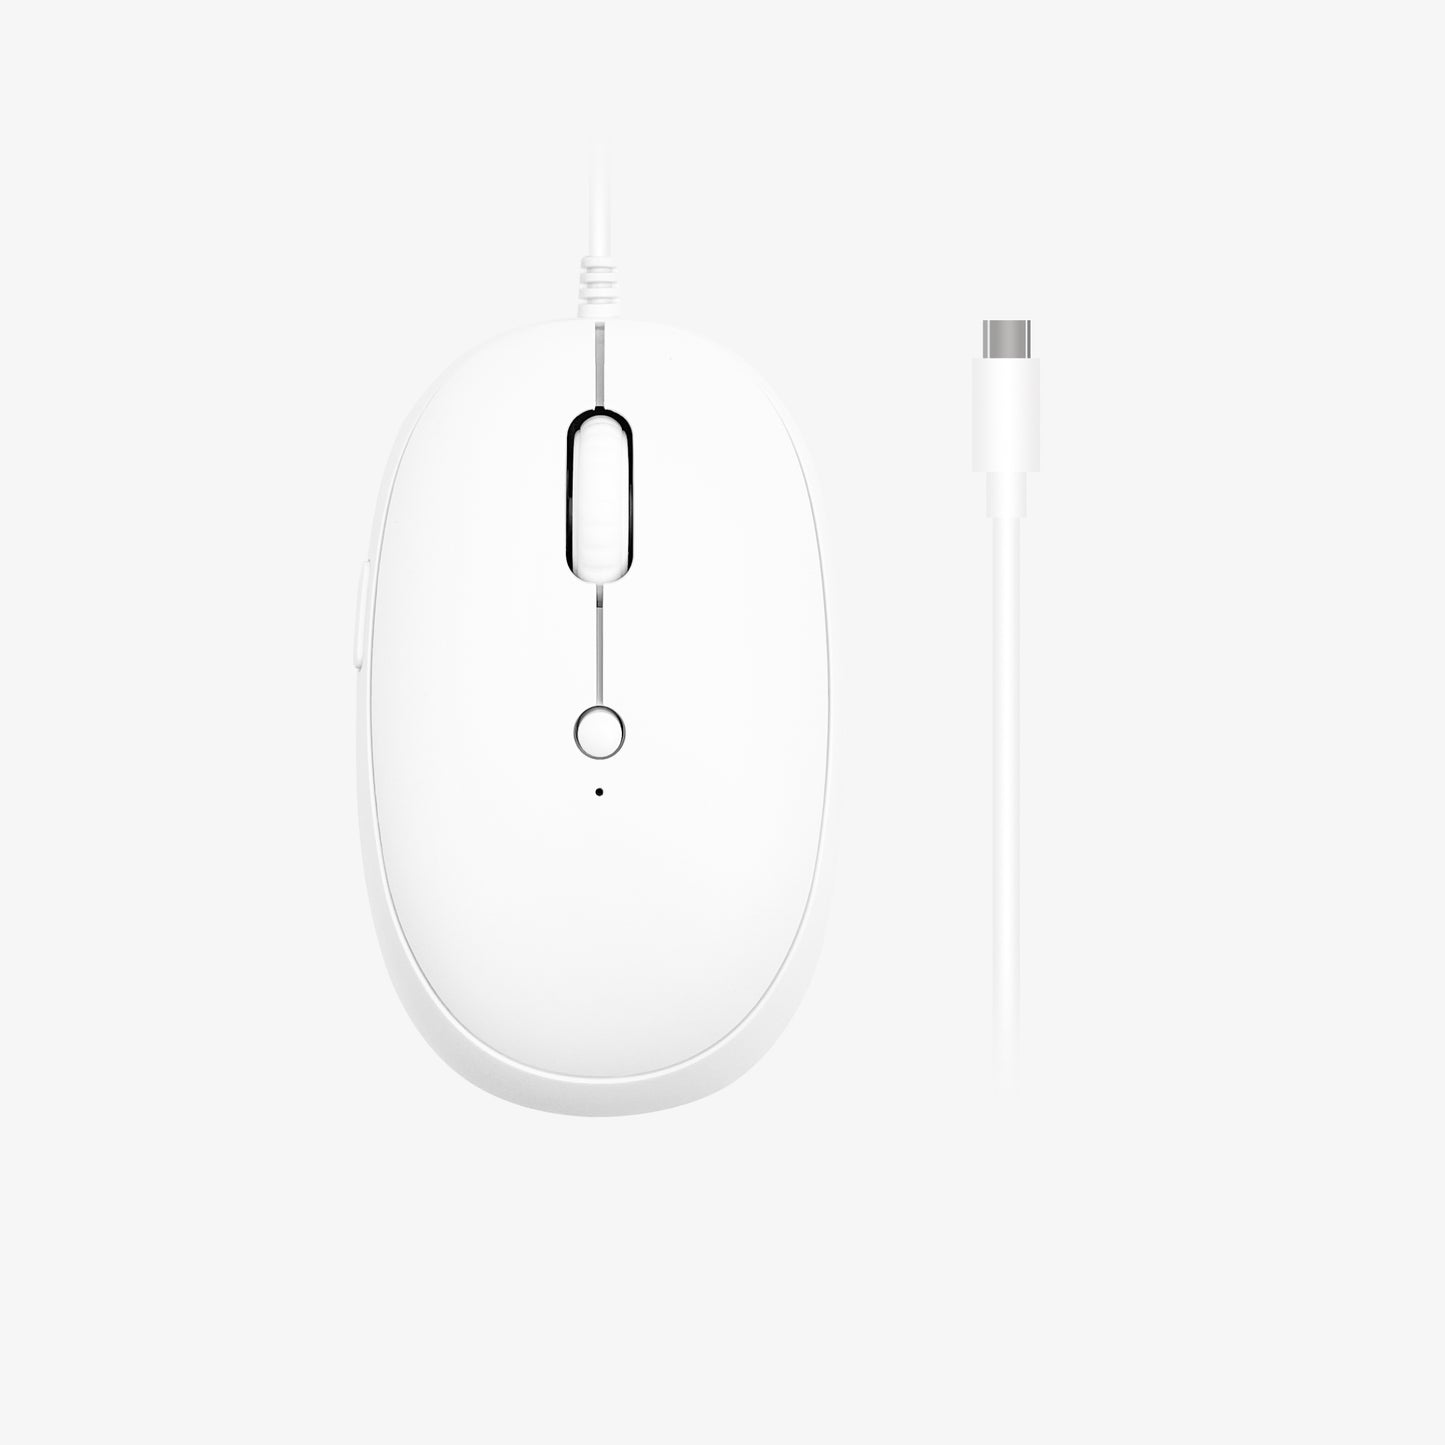 
                  
                    MFAEC - Wired USB C Mouse for Mac with Back Button
                  
                